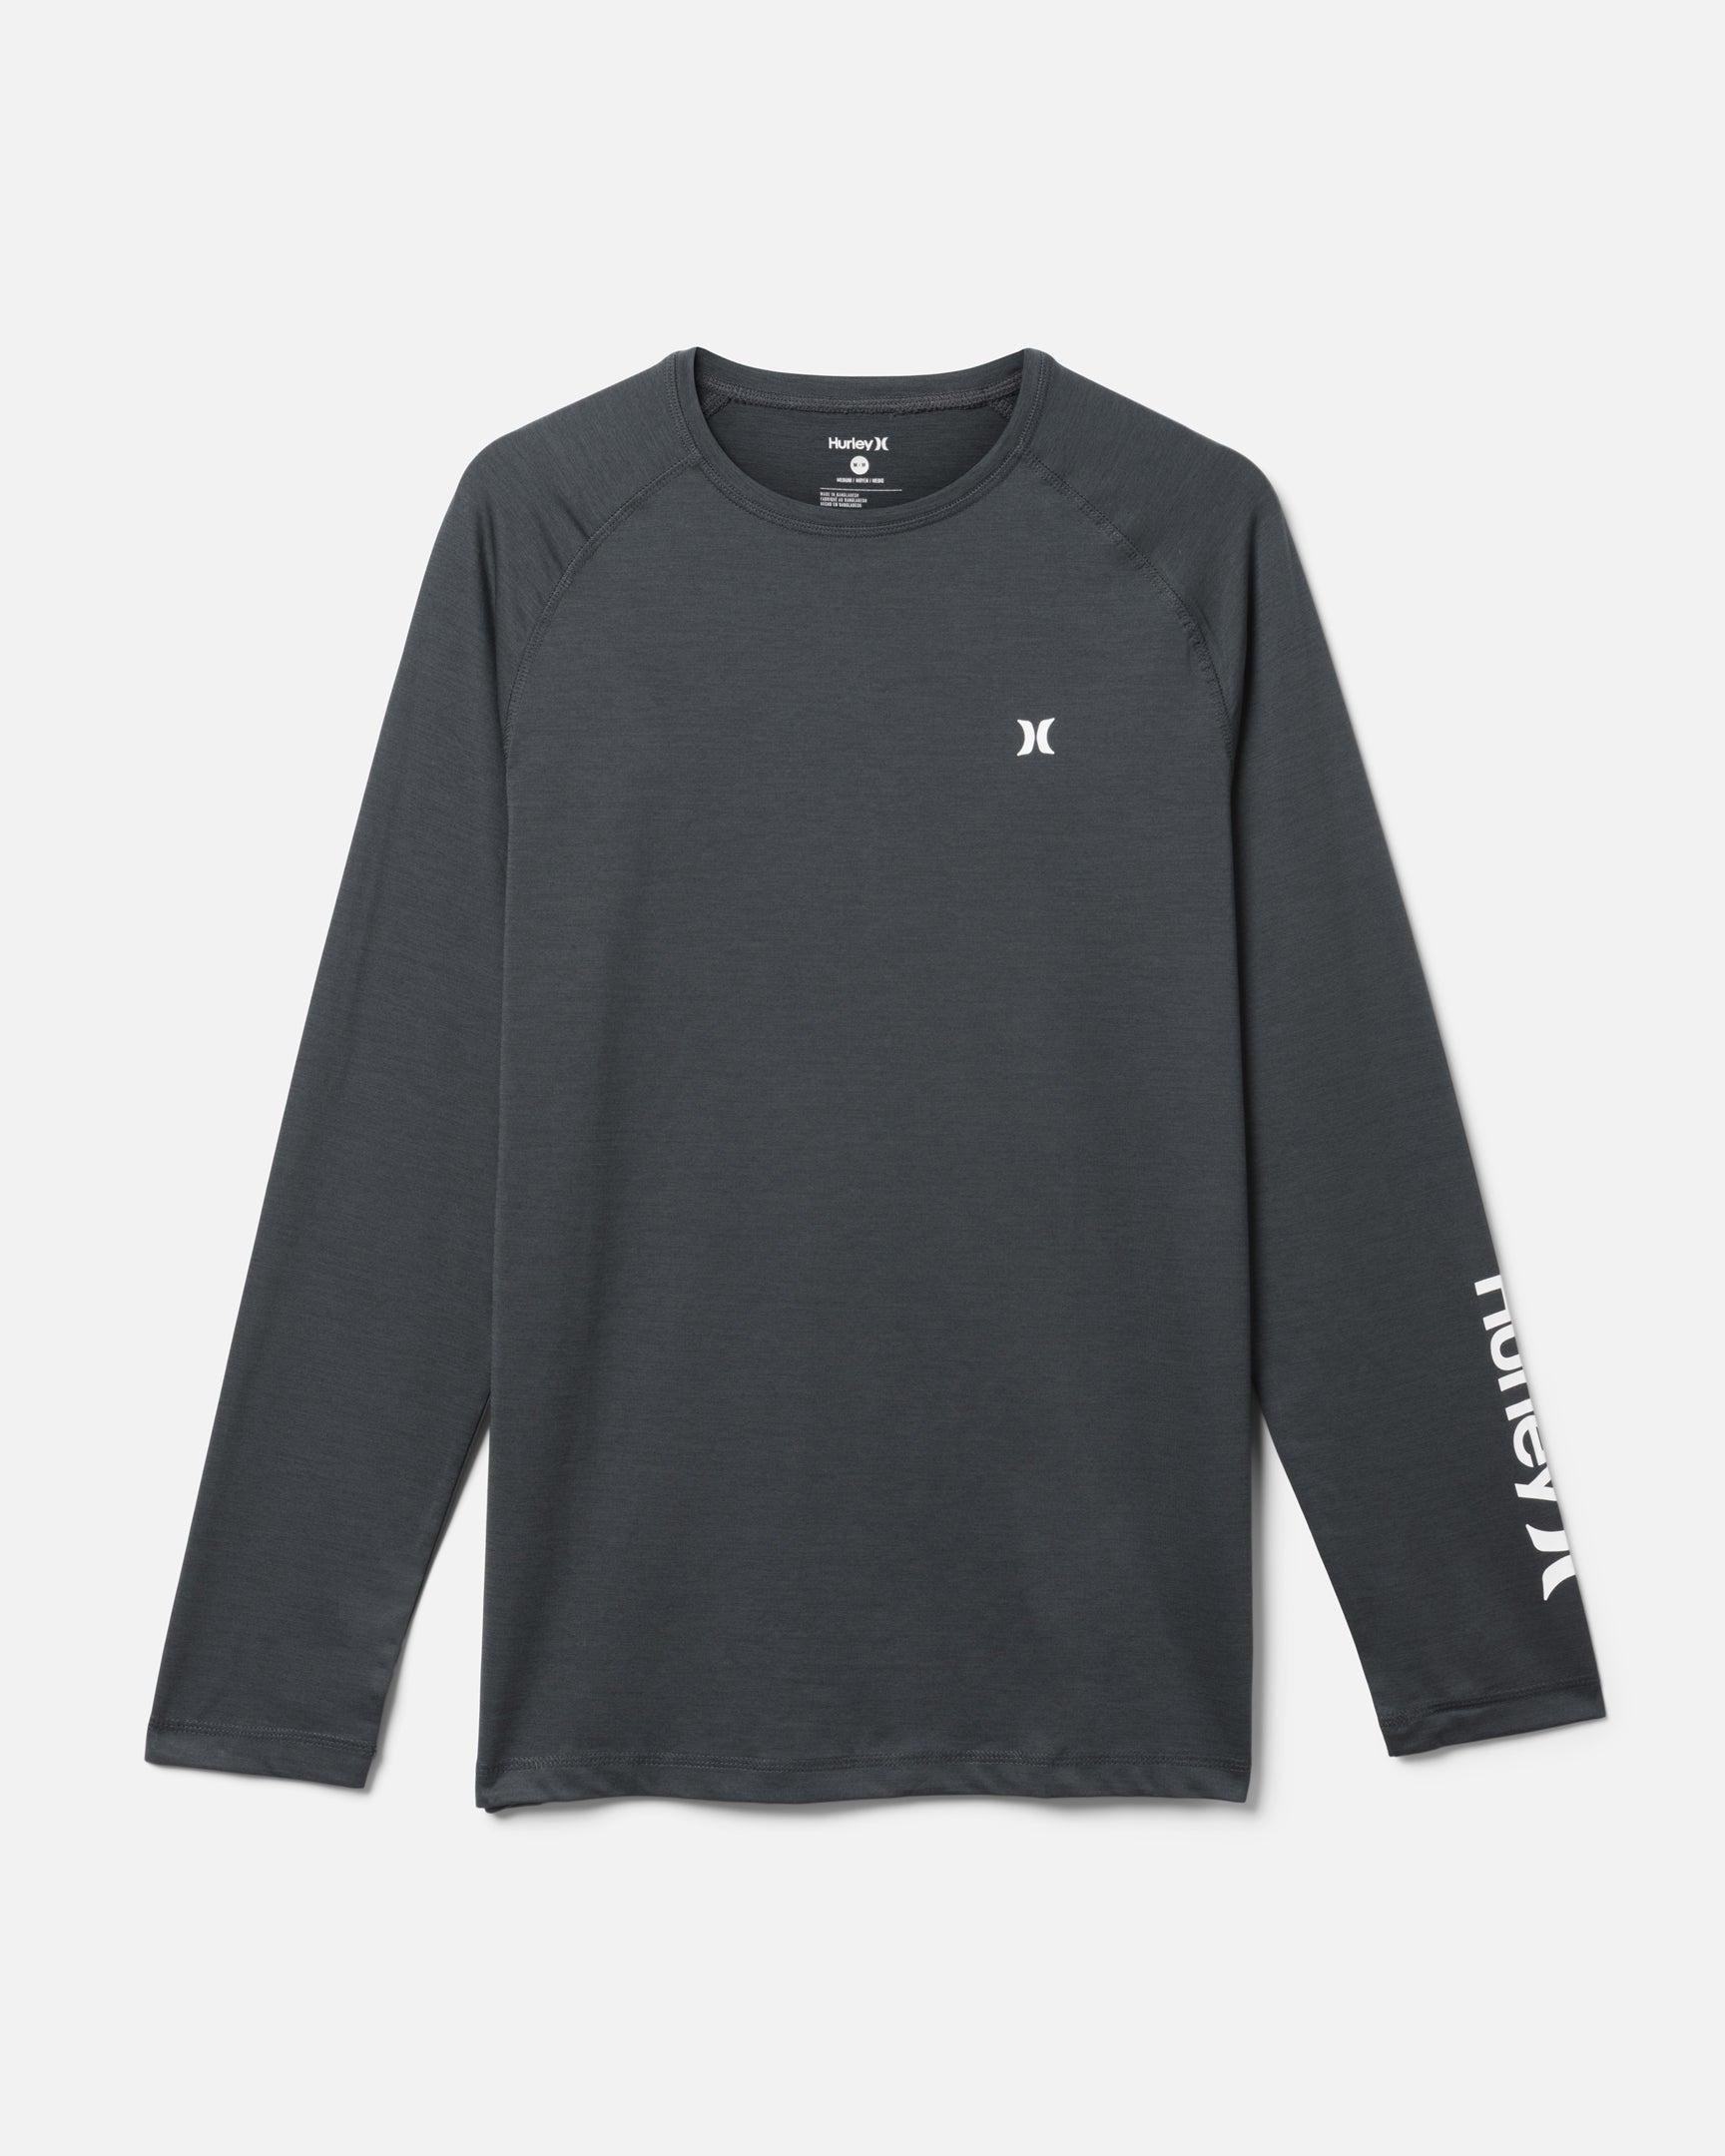 Exist One And Only Long Sleeve Rashguard by HURLEY